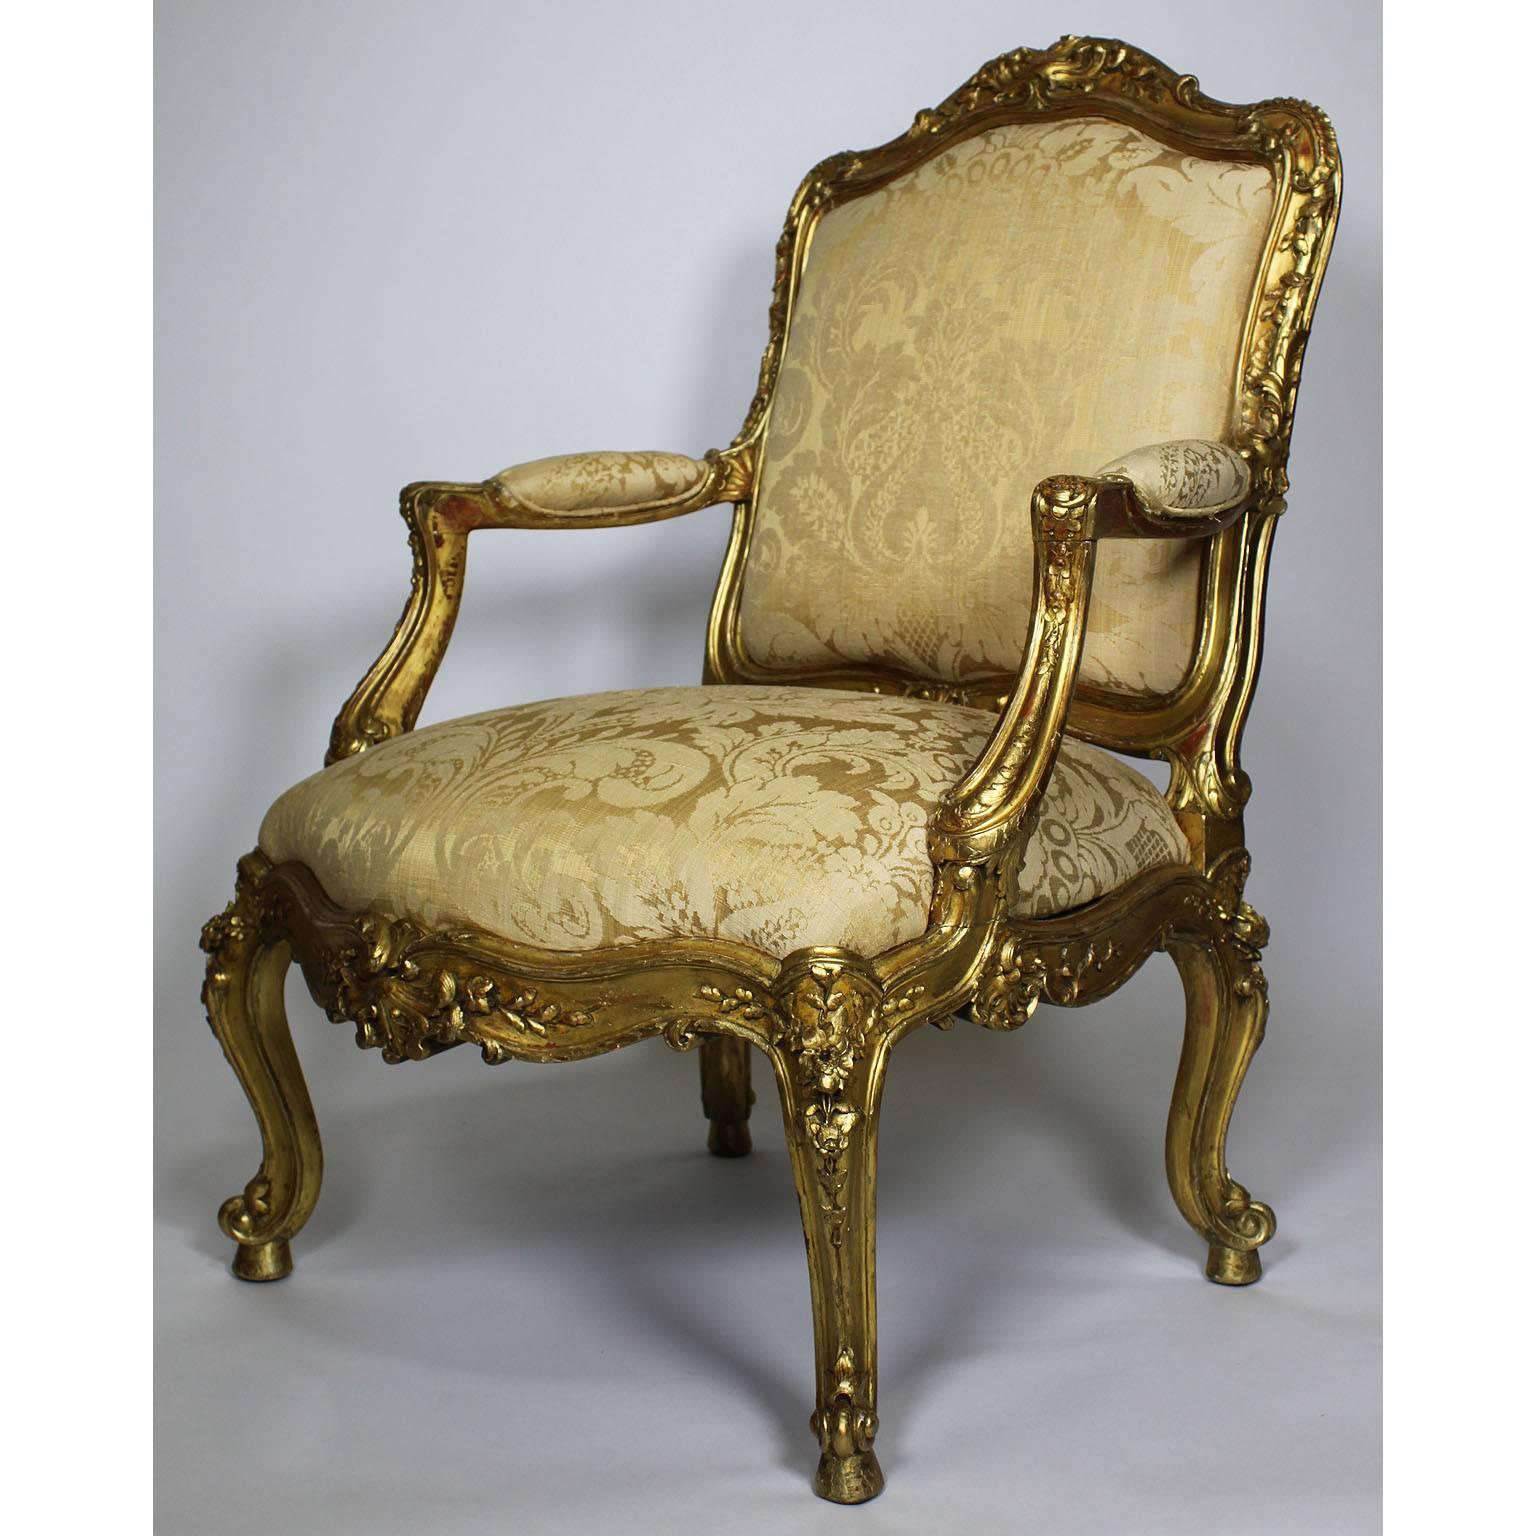 A fine pair of Italian 19th century Rococo style giltwood carved armchairs; the arched upholstered paneled backs with foliate scroll cresting and similar borders, having padded arm supports above slip-in seat, raised on flower heads decorated